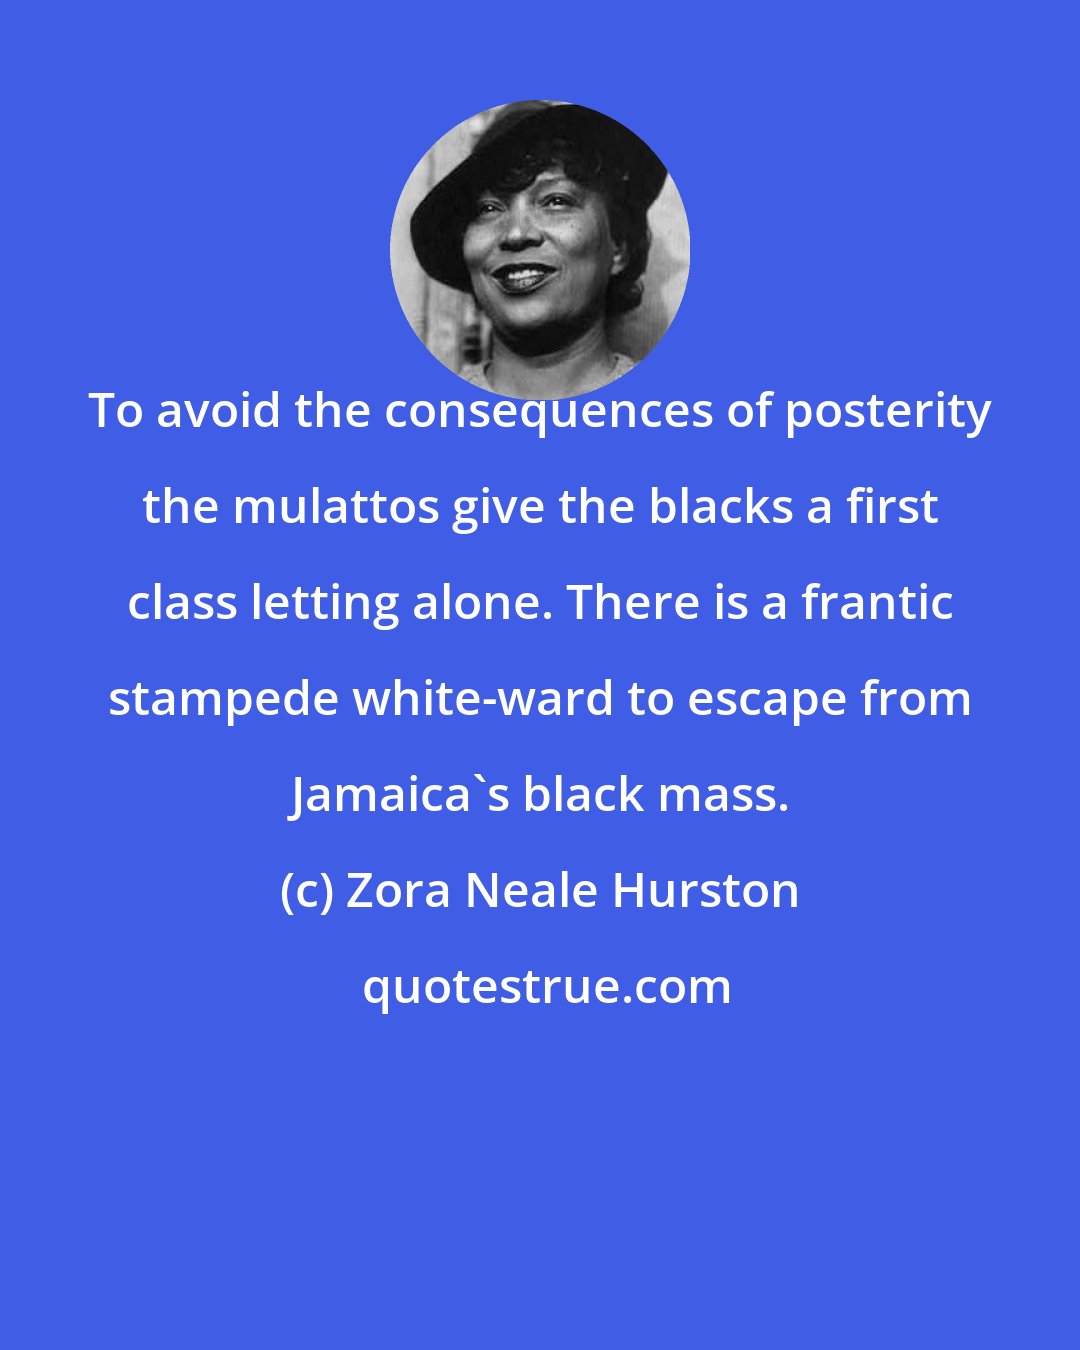 Zora Neale Hurston: To avoid the consequences of posterity the mulattos give the blacks a first class letting alone. There is a frantic stampede white-ward to escape from Jamaica's black mass.